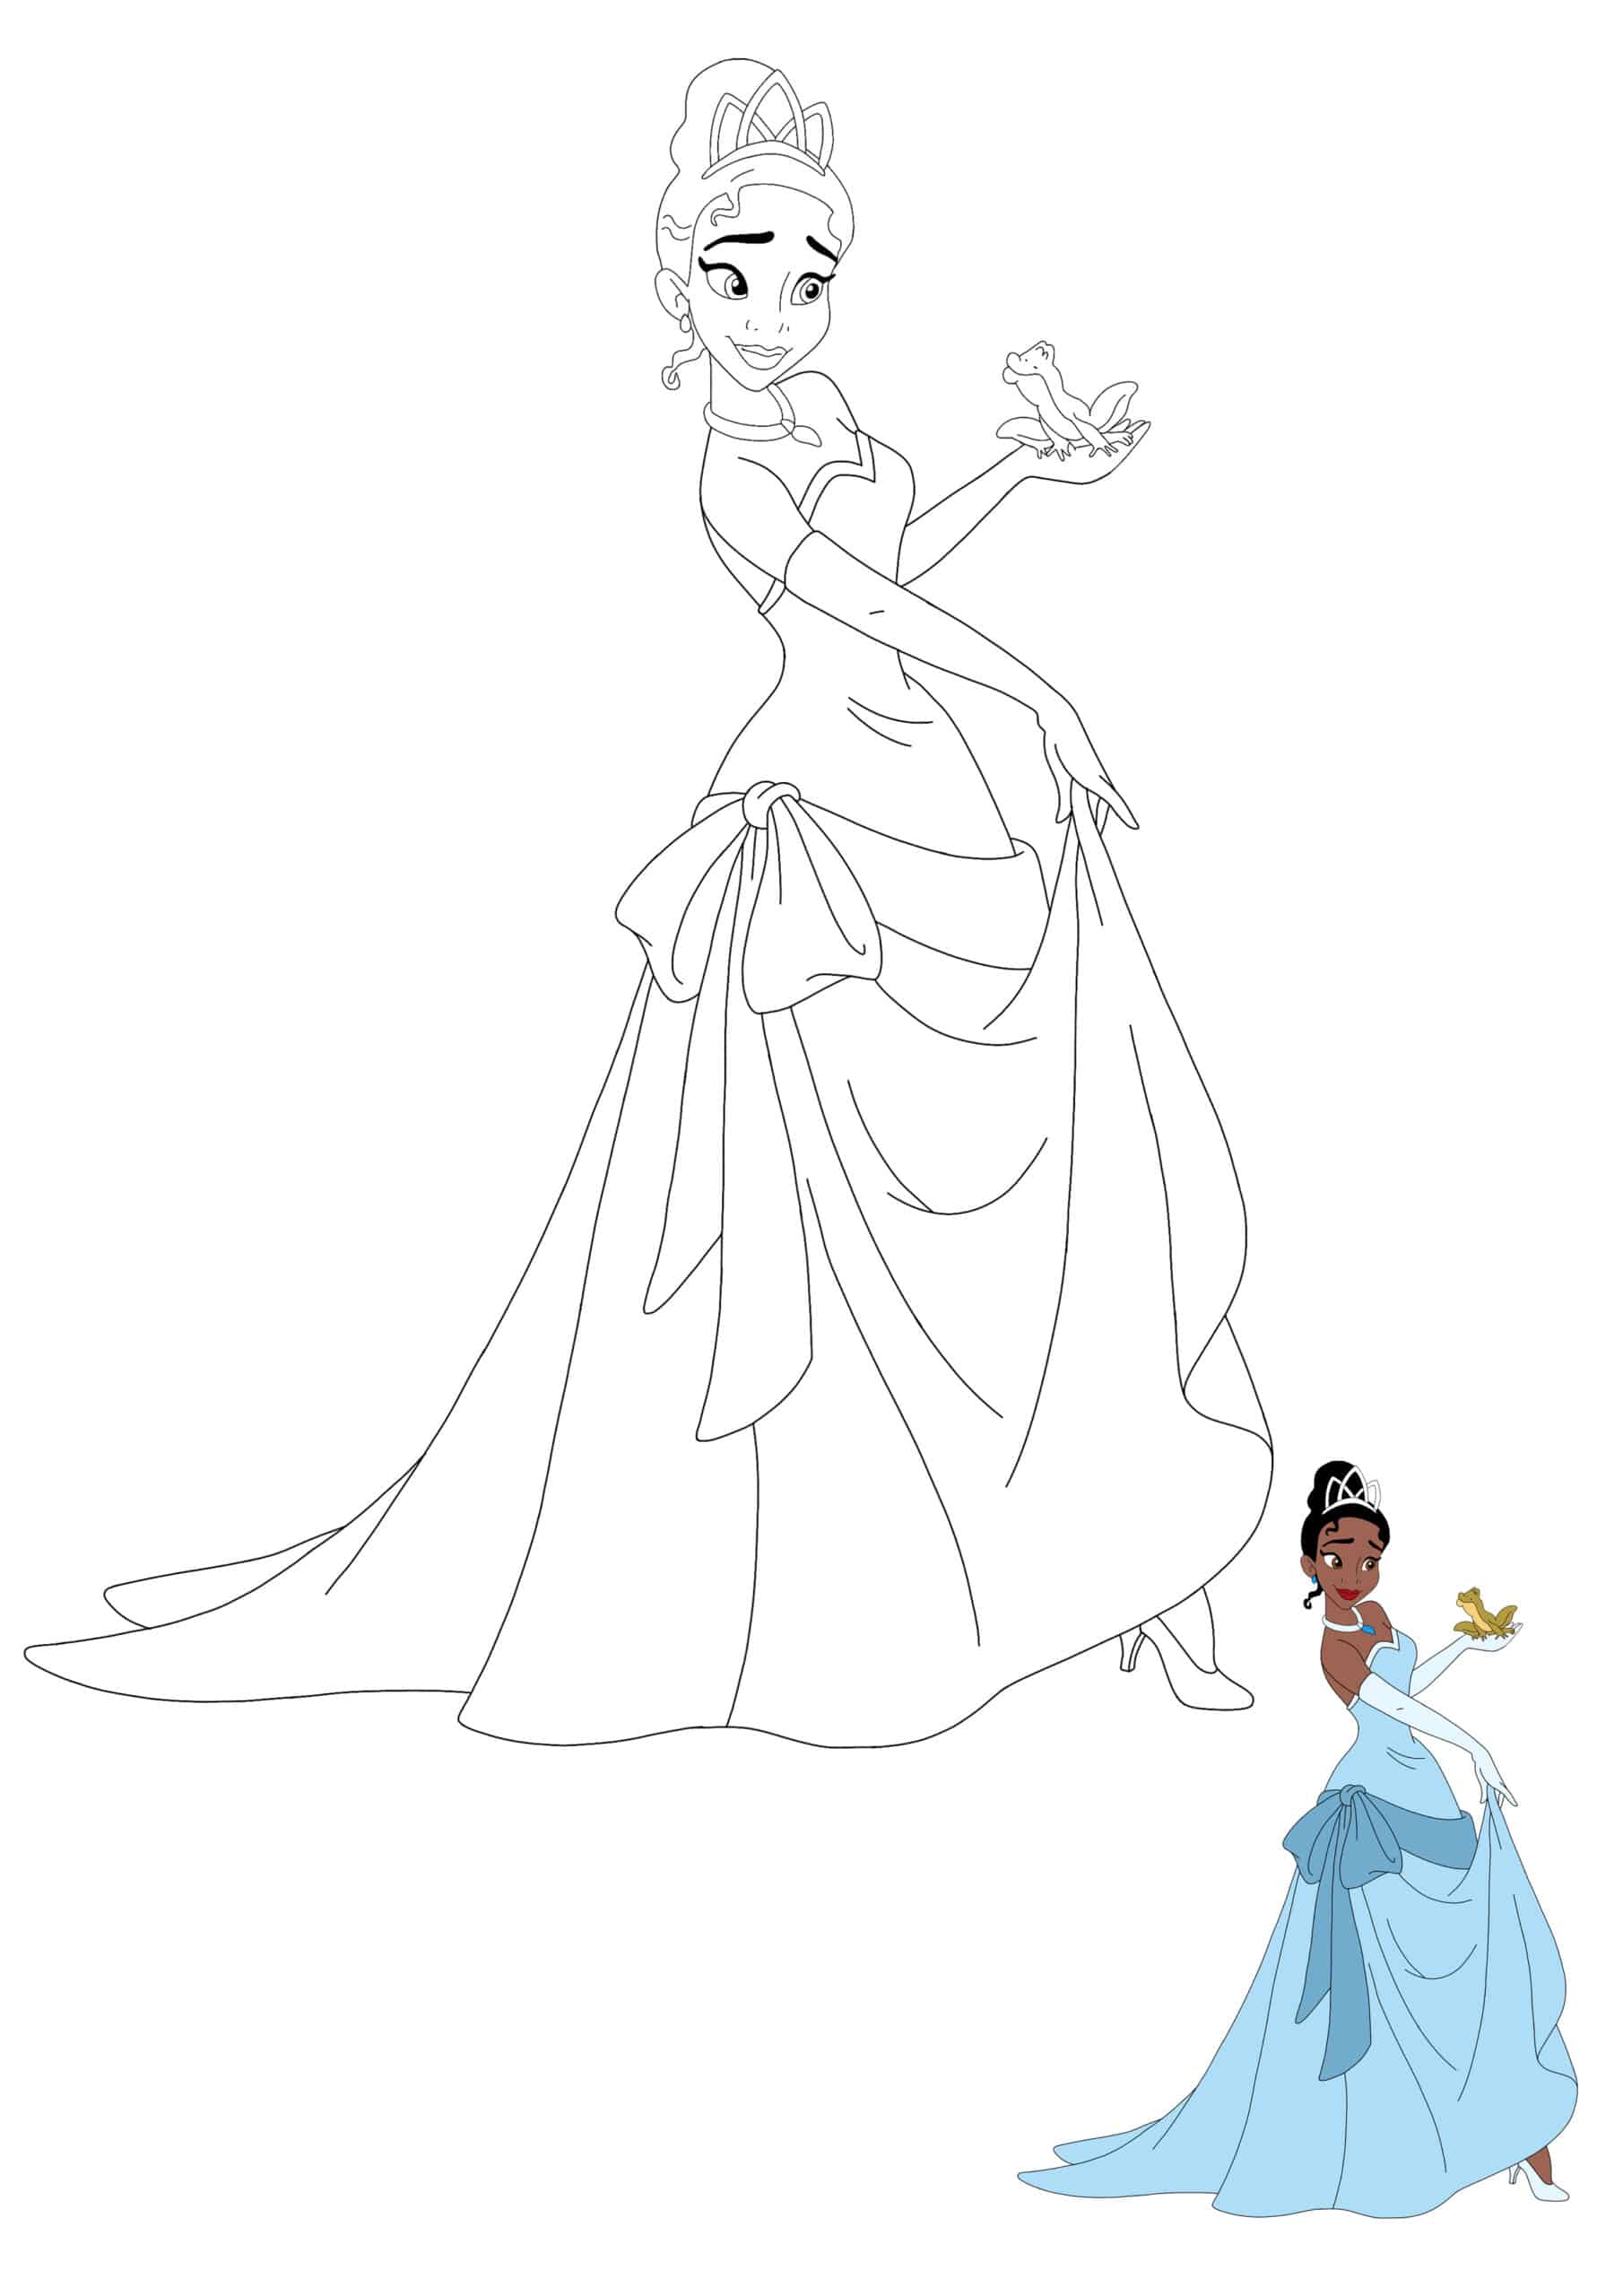 Princess Tiana And Prince Naveen As A Frog Coloring Pages ...